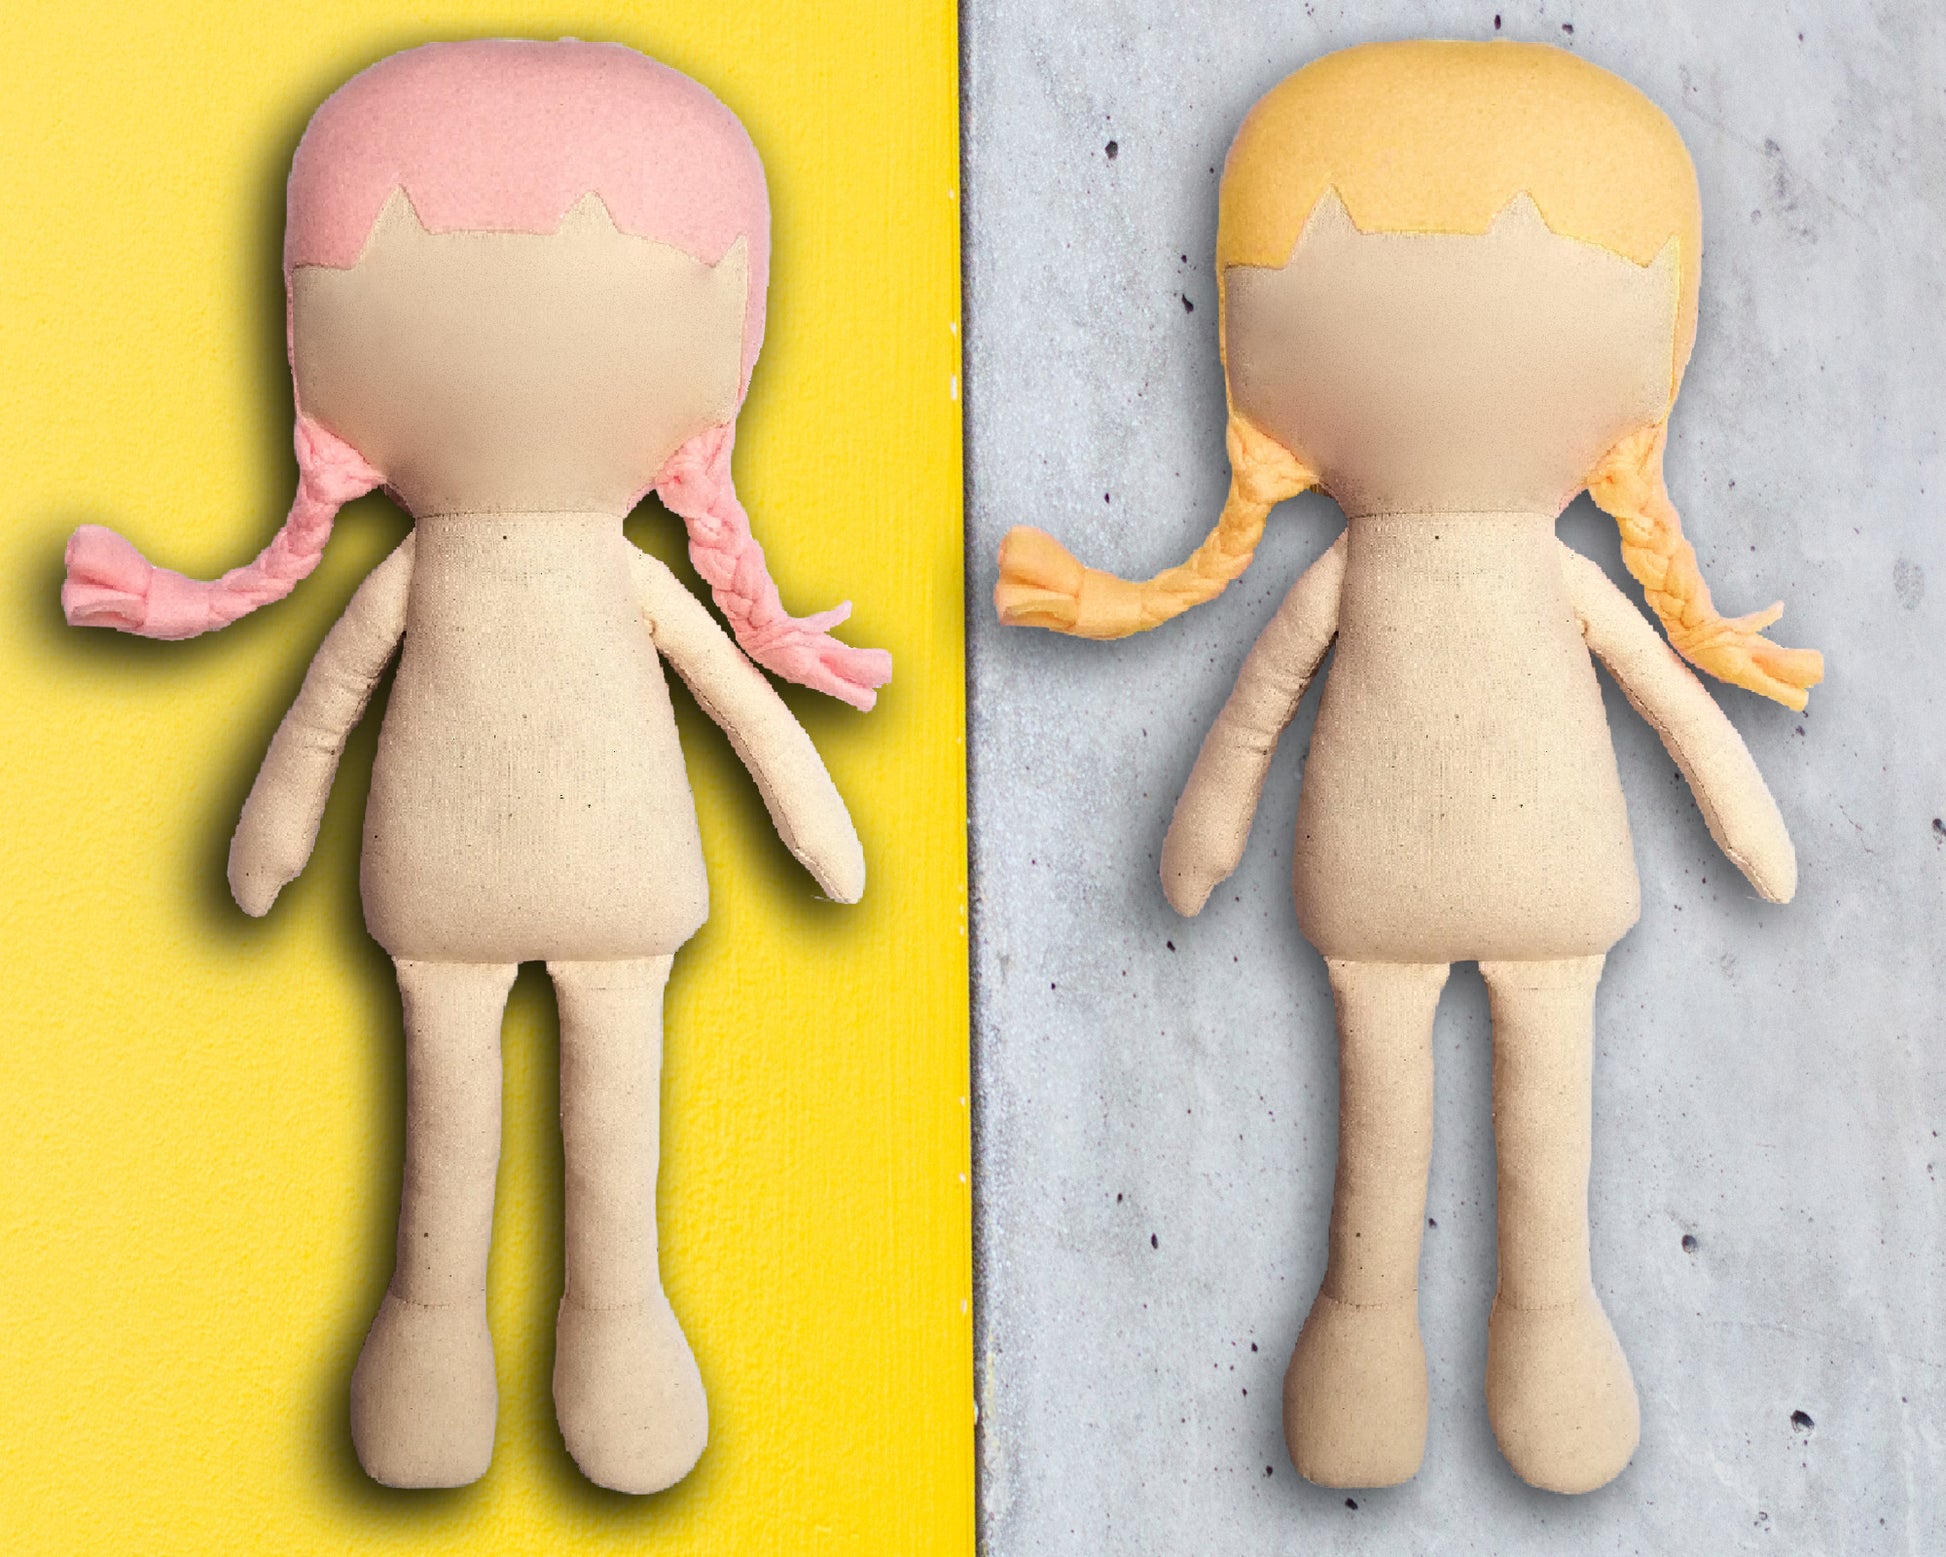 Doll Body 18 inch with hair - PDF doll sewing pattern and tutorial doll pattern rag doll pattern